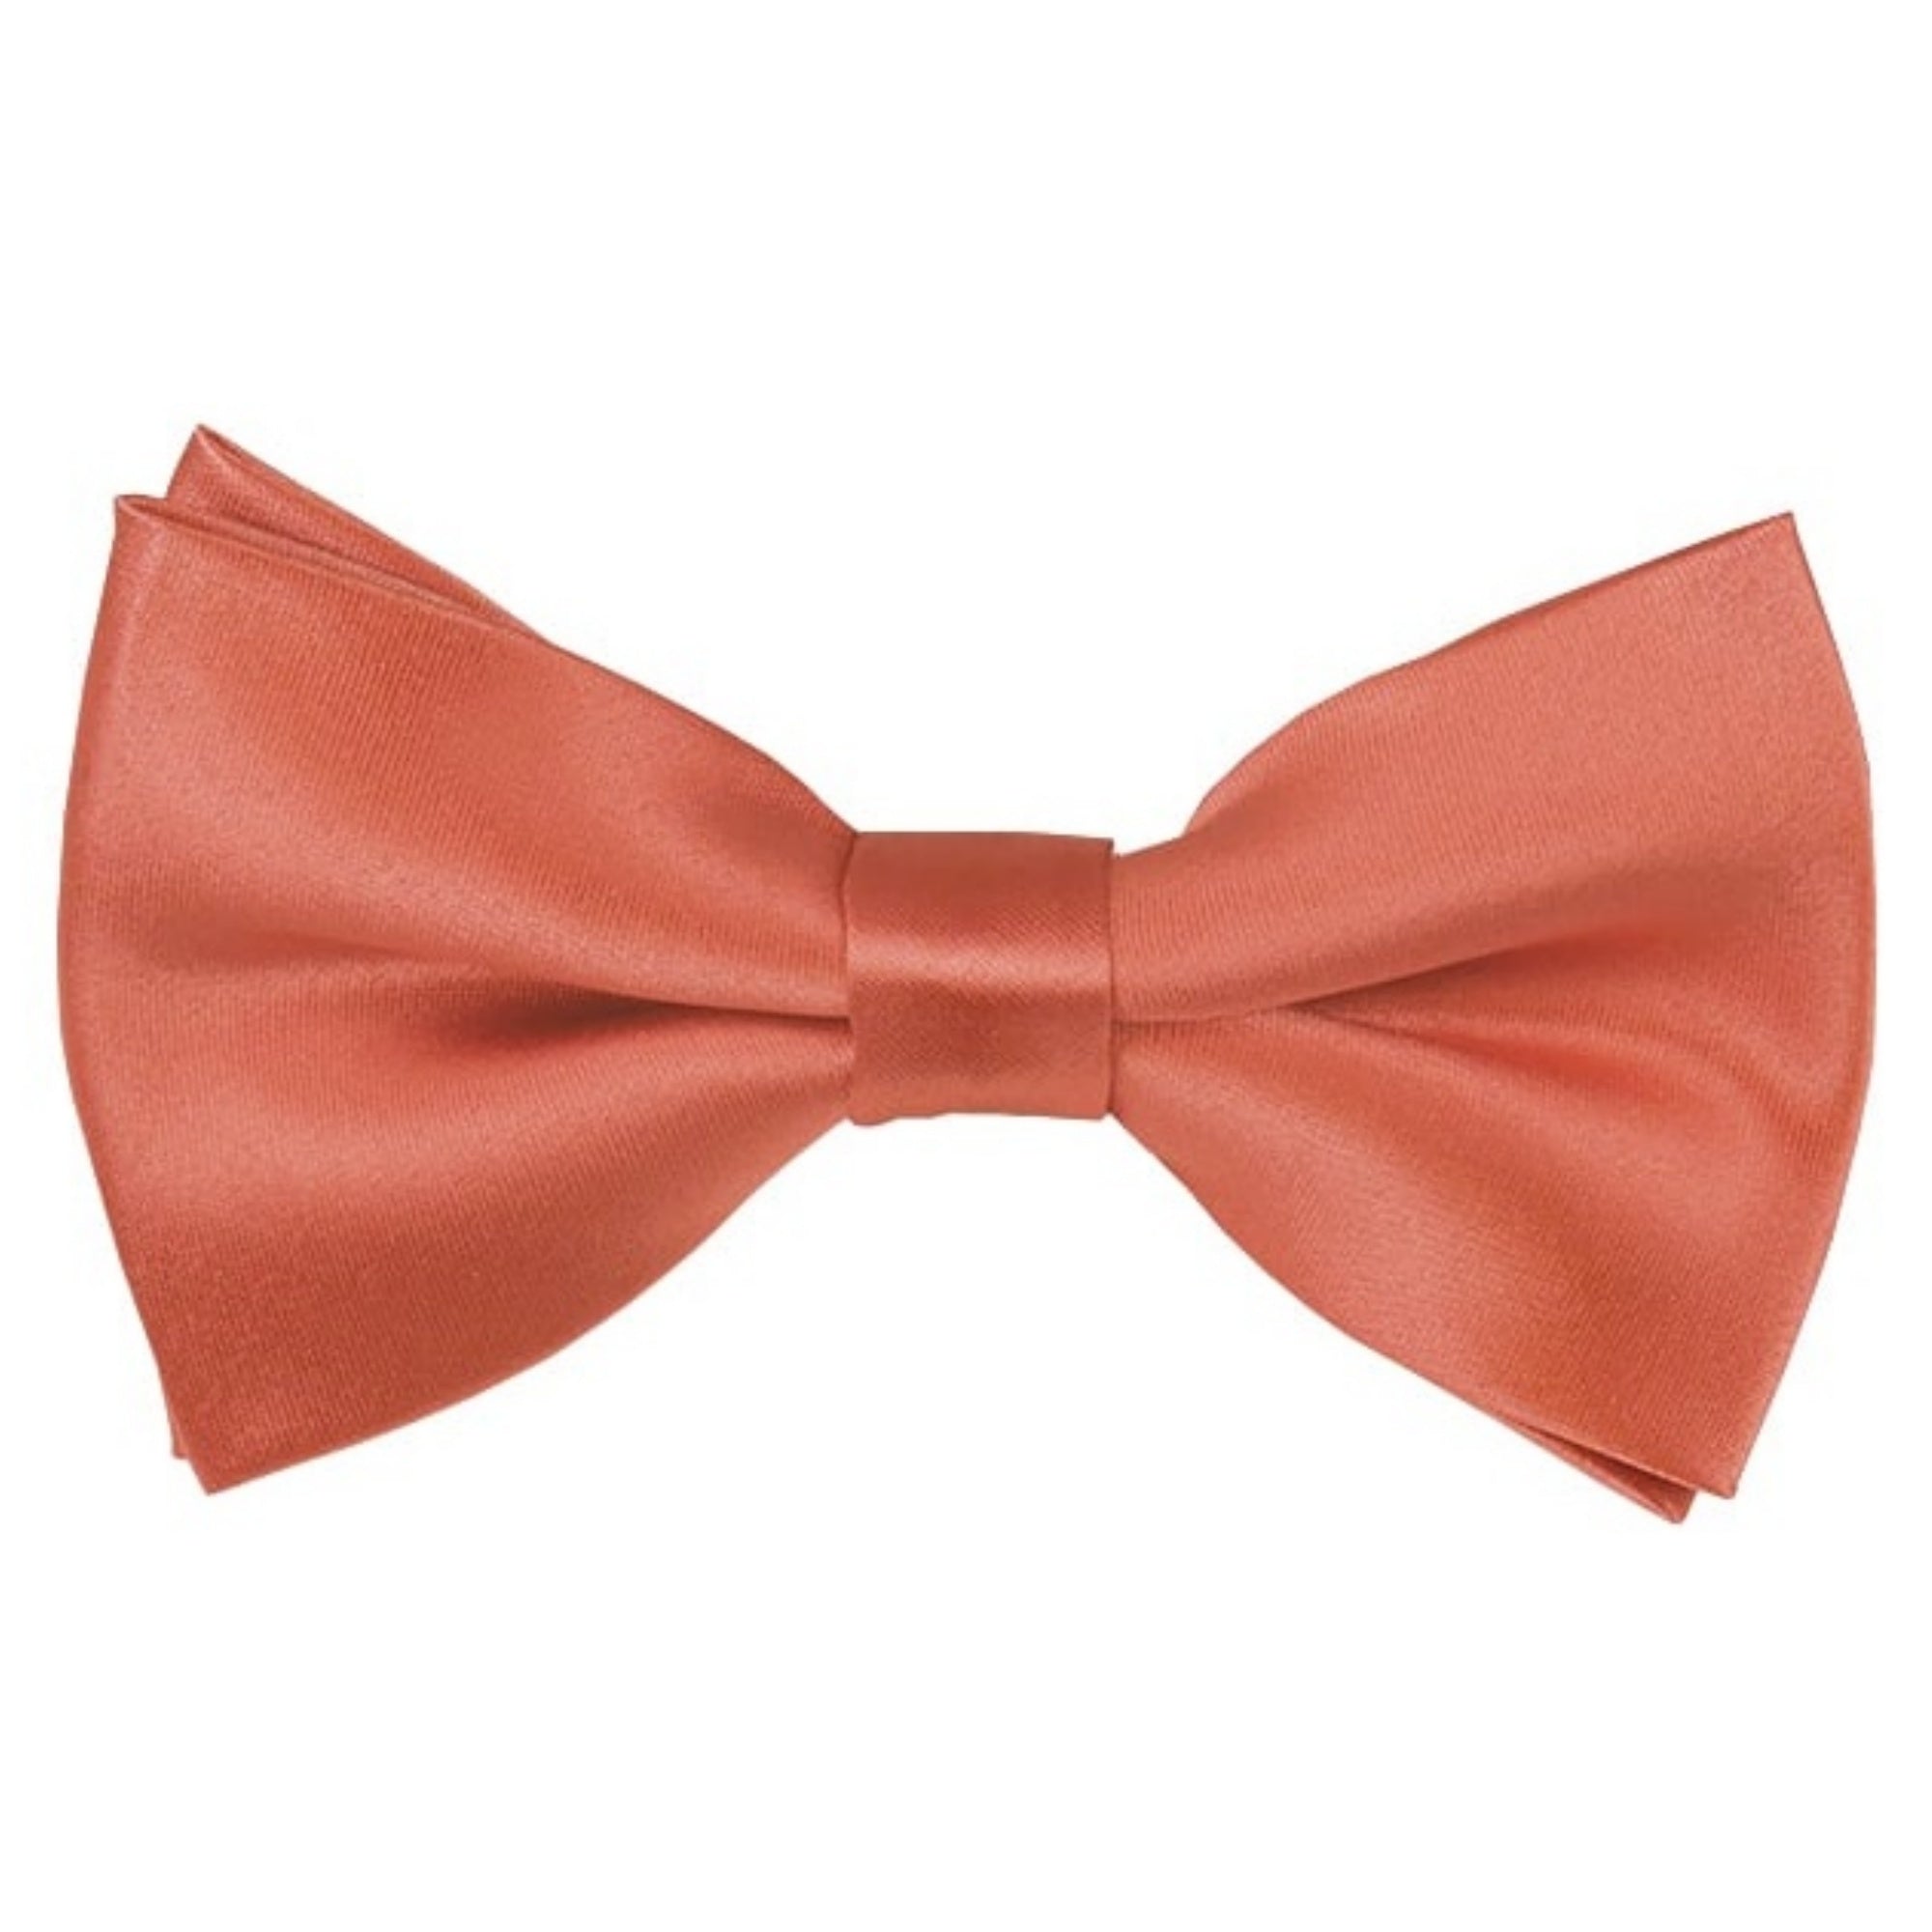 TheDapperTie Men's Solid Color 2.5 W And 4.5 L Inch Pre-Tied adjustable Bow Ties Men's Solid Color Bow Tie TheDapperTie Palm Coast Coral  